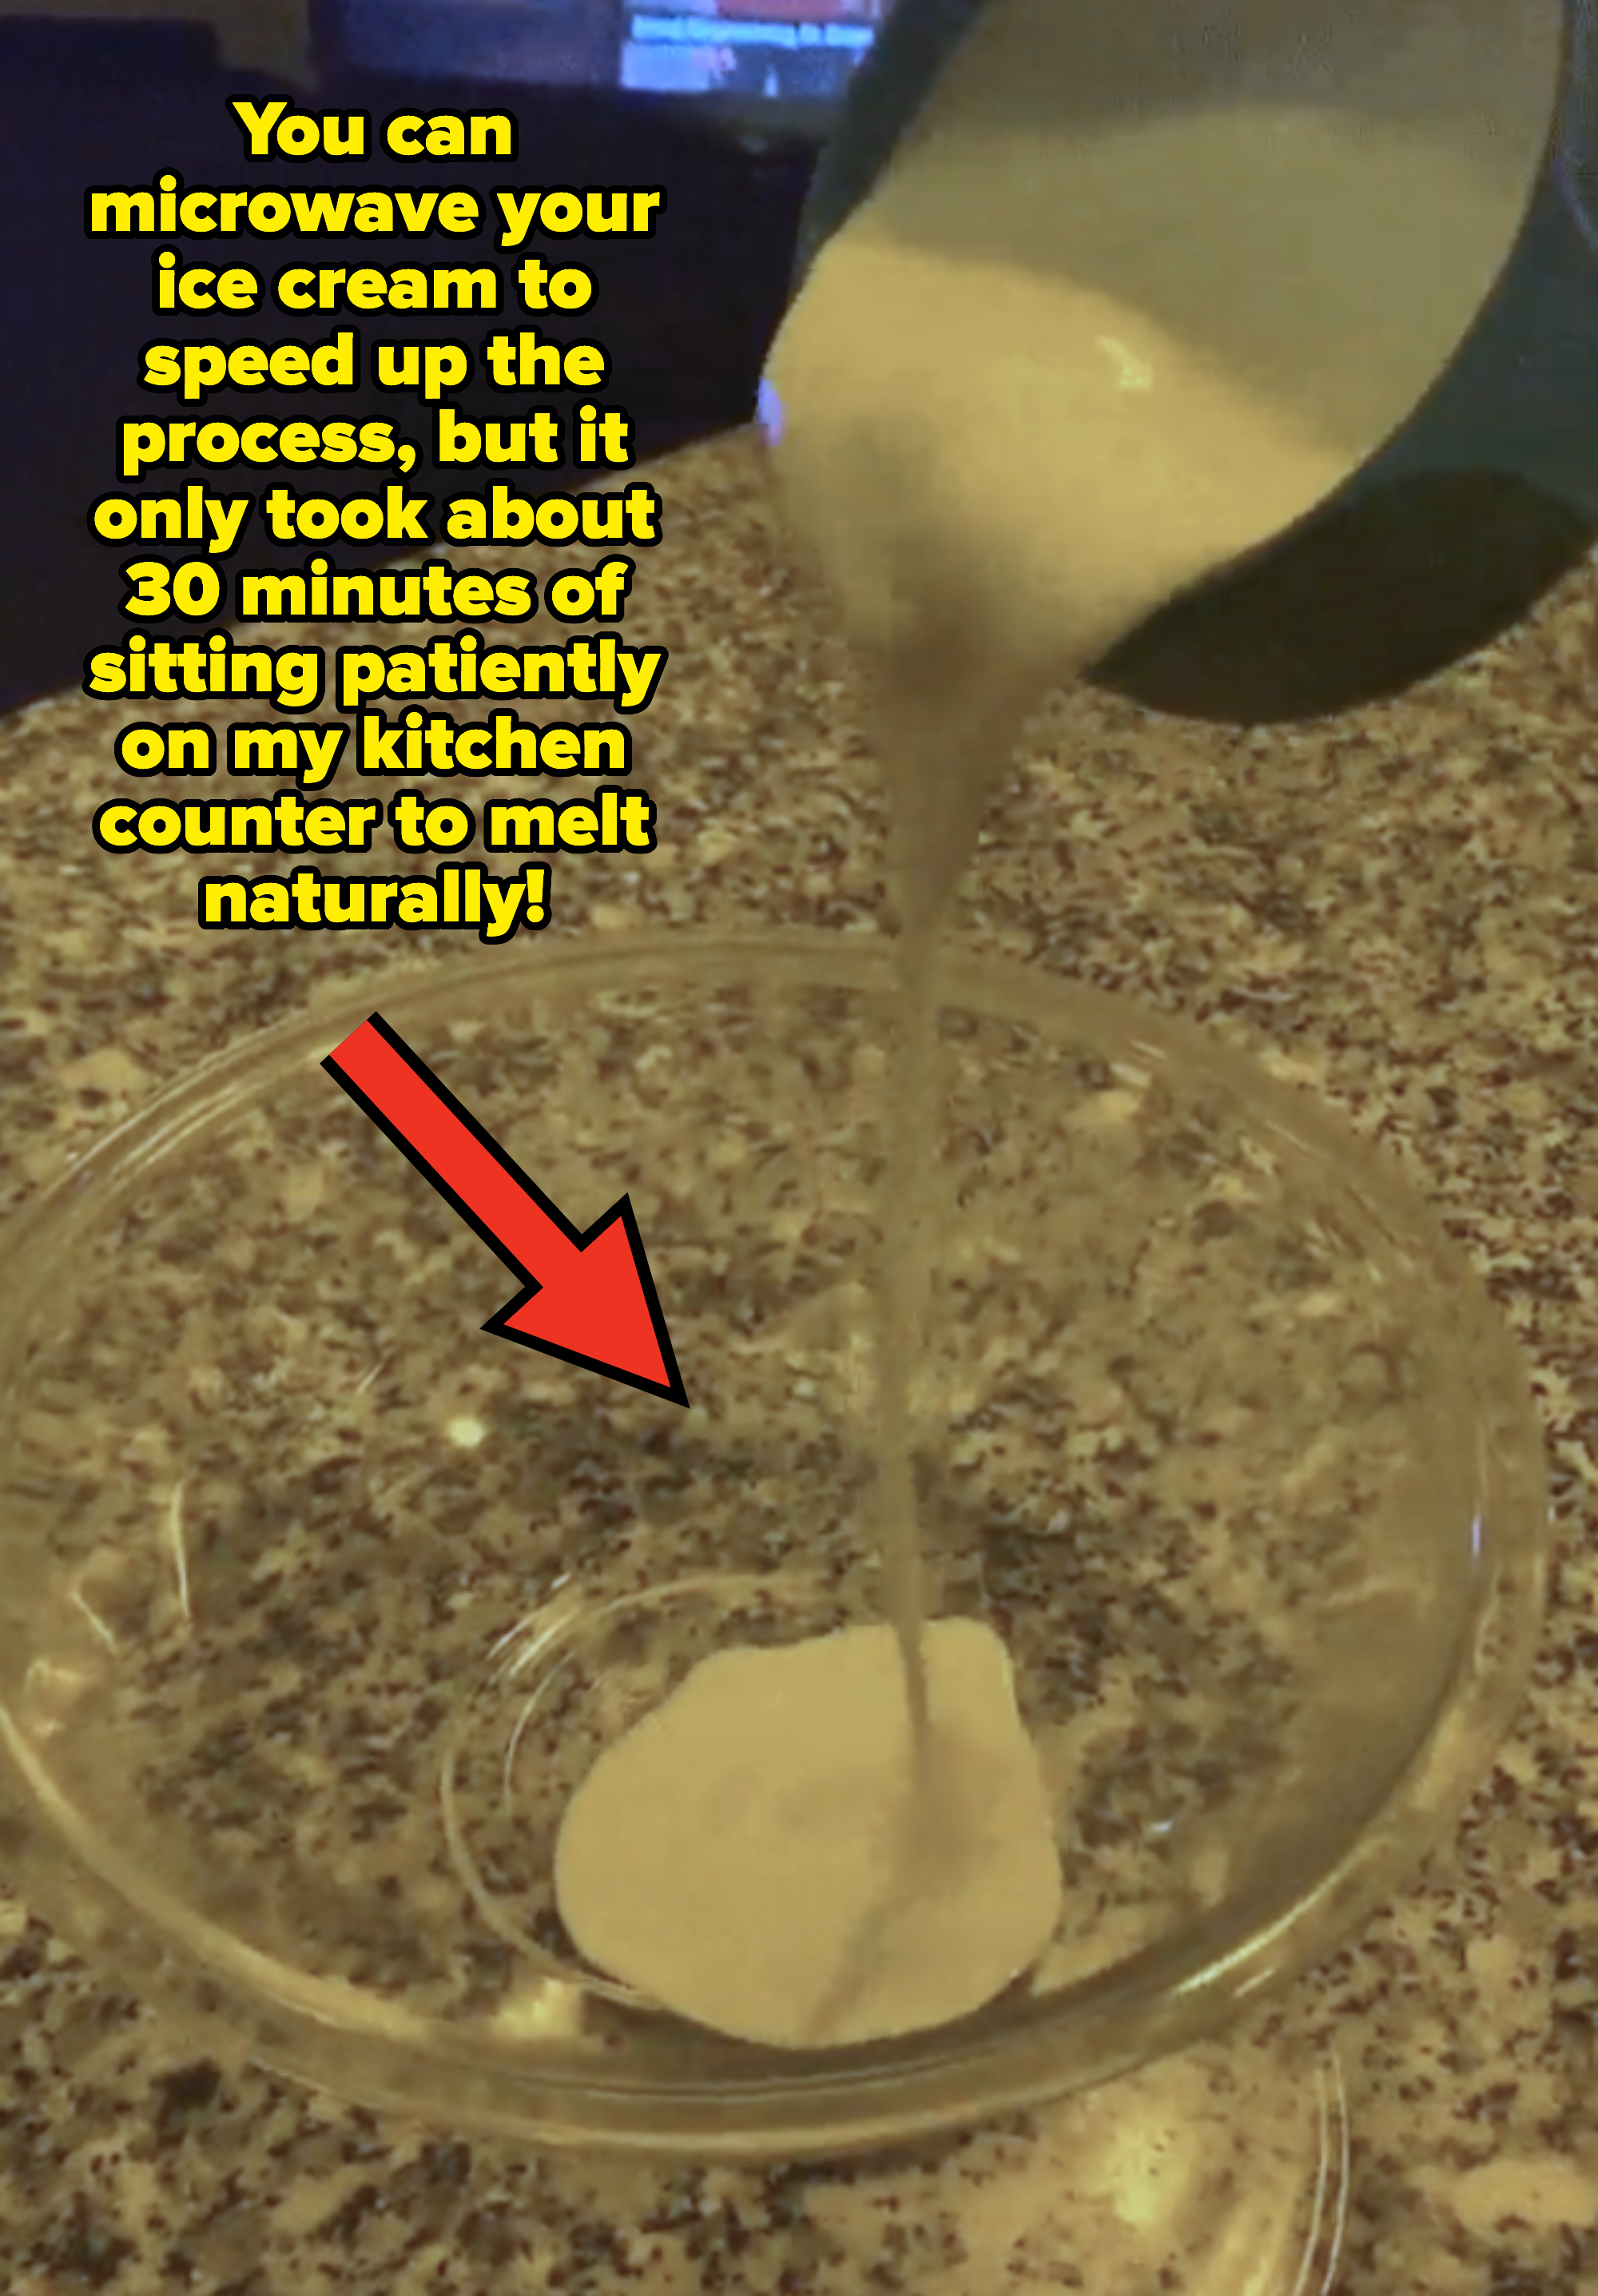 melted ice cream being poured into mixing bowl with text &quot;you can microwave your ice cream to speed up the process, but it only took about 30 minutes of sitting patiently on my kitchen counter to melt naturally!&quot;